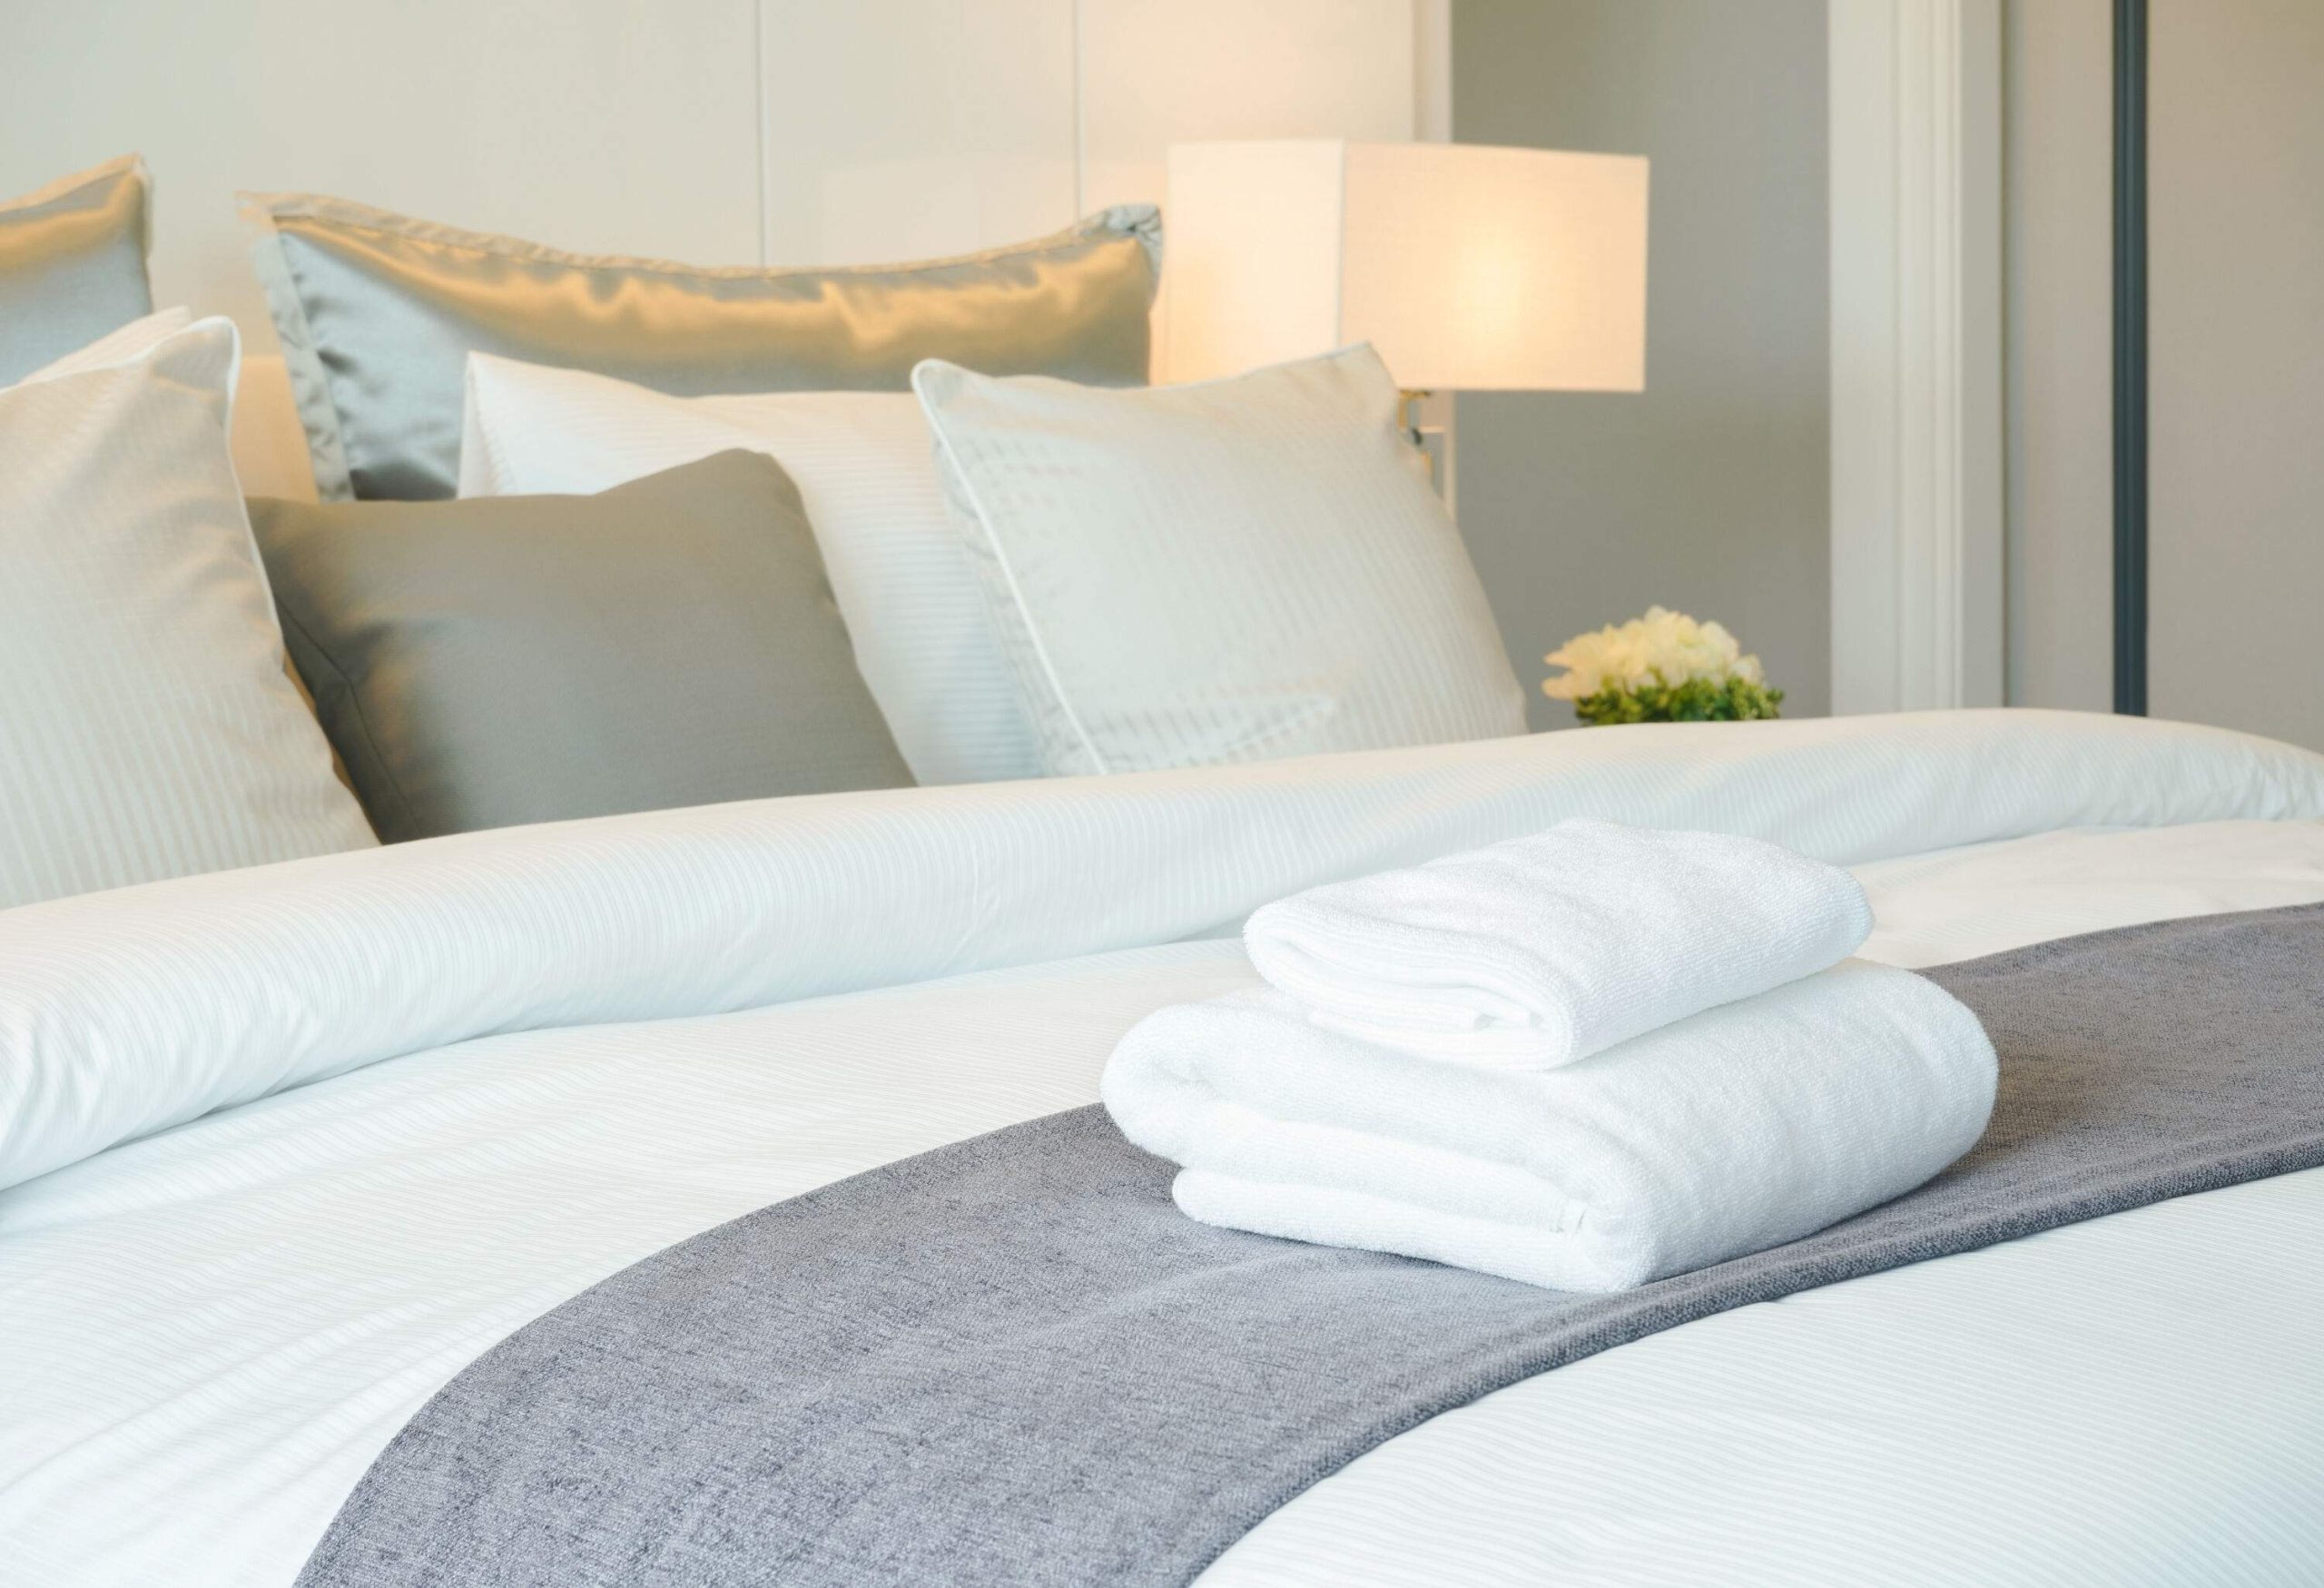 A bed with decorative pillows against the headboard and folded white towels over the duvet.